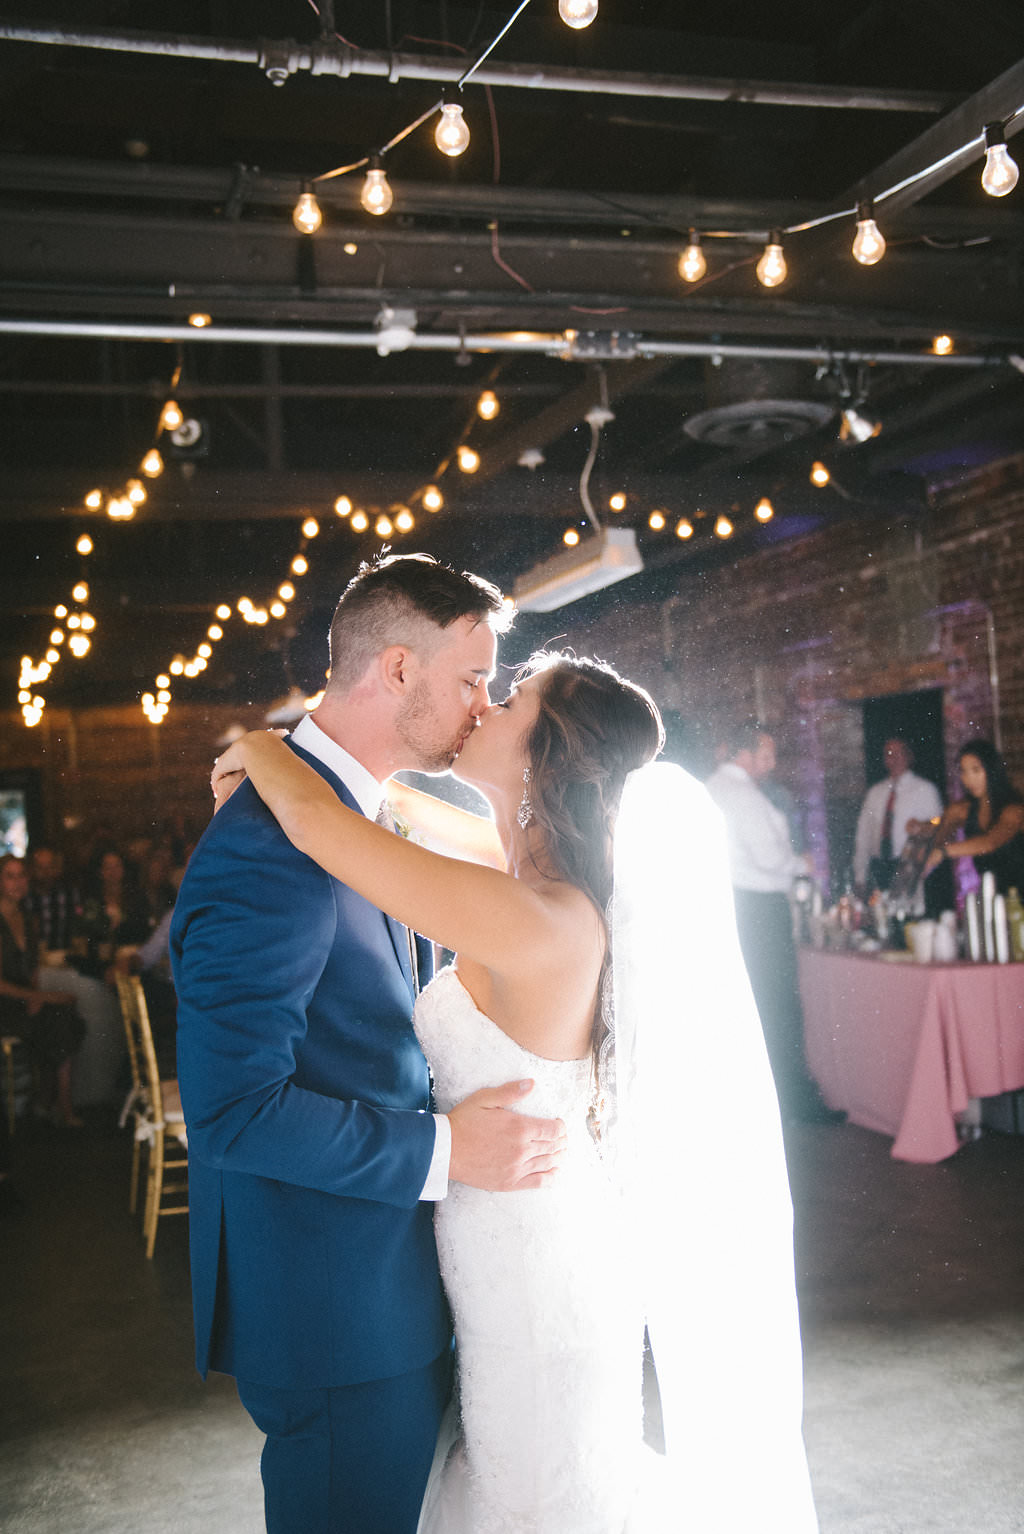 Industrial Chic Wedding Reception Bride and Groom First Dance Portrait with String Lights | Downtown Tampa Ybor City Historic Venue CL Space